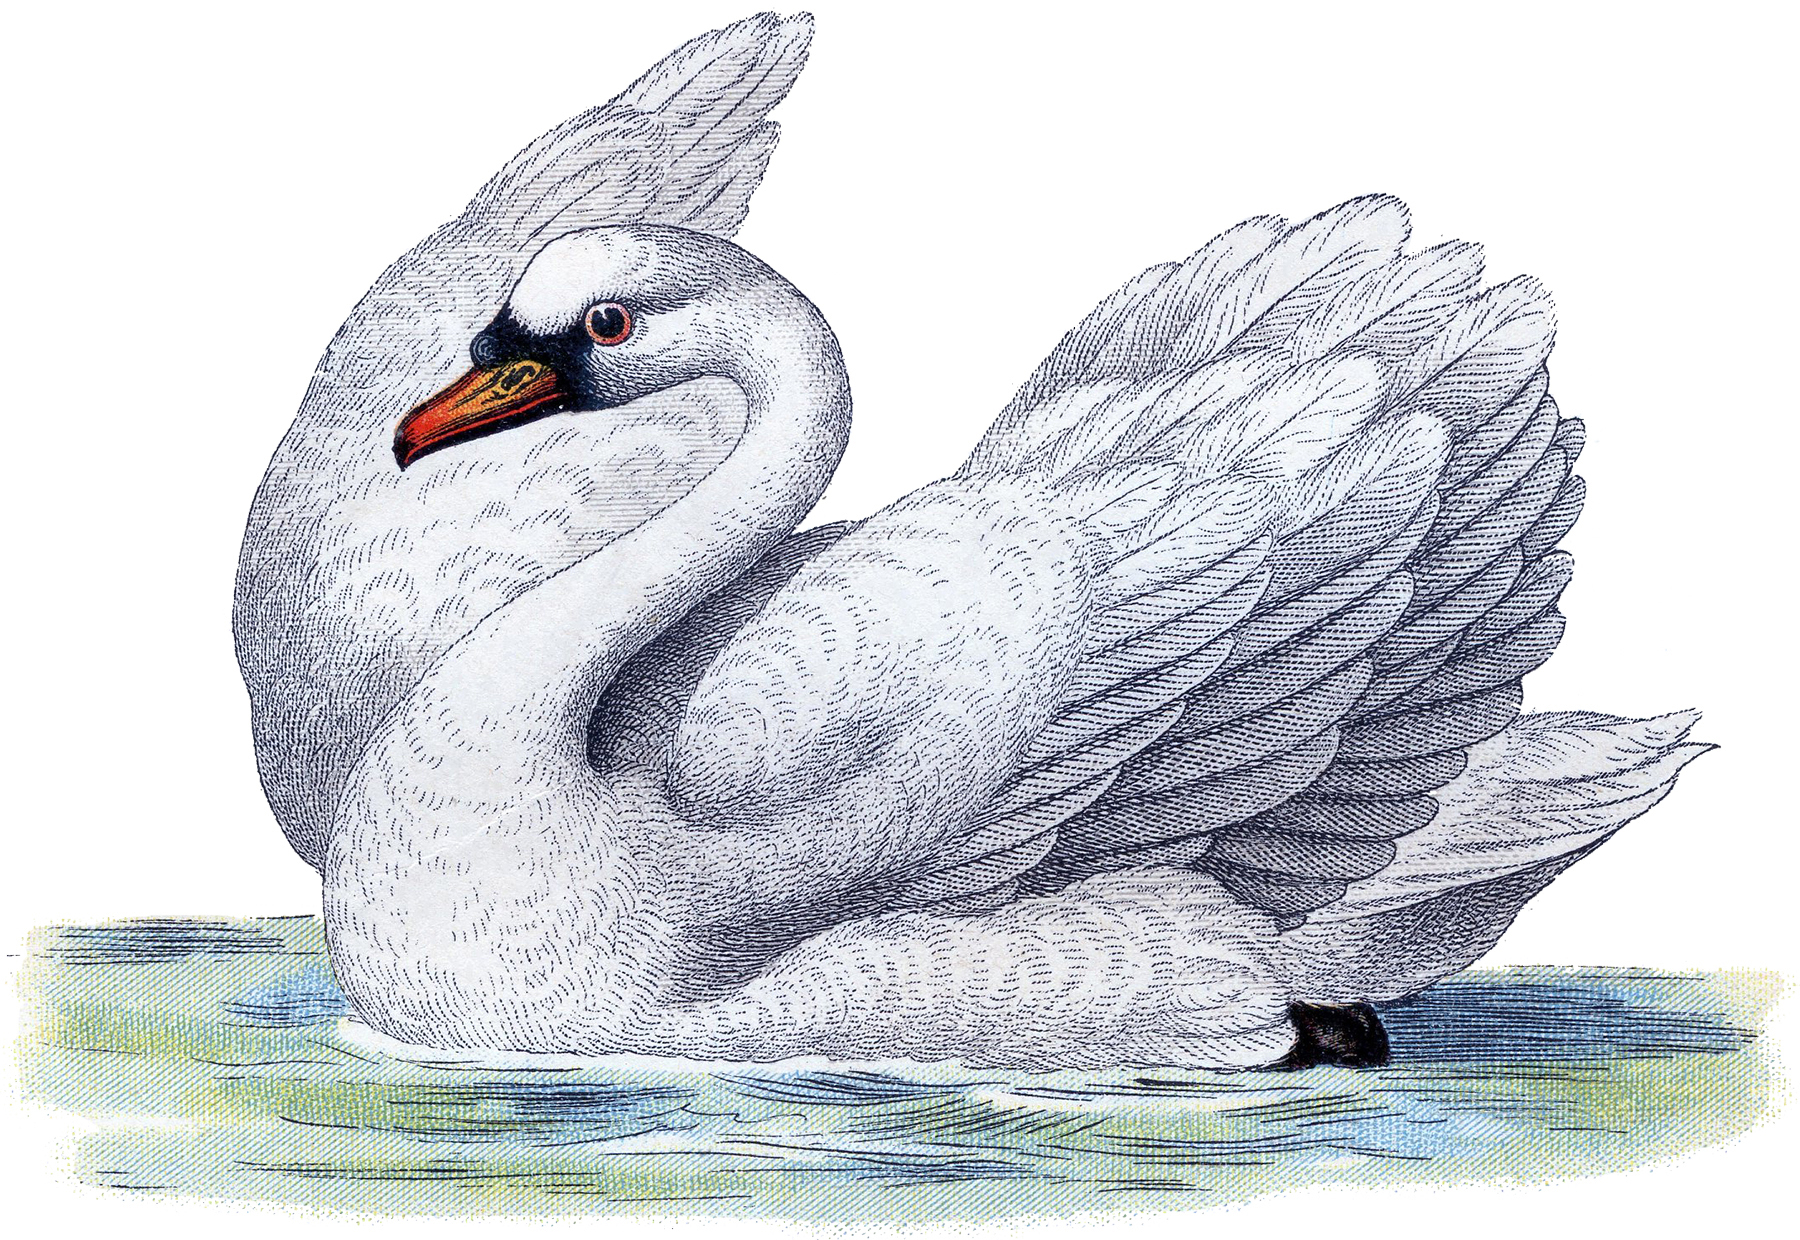 Best Free Swan Image! - The Graphics Fairy